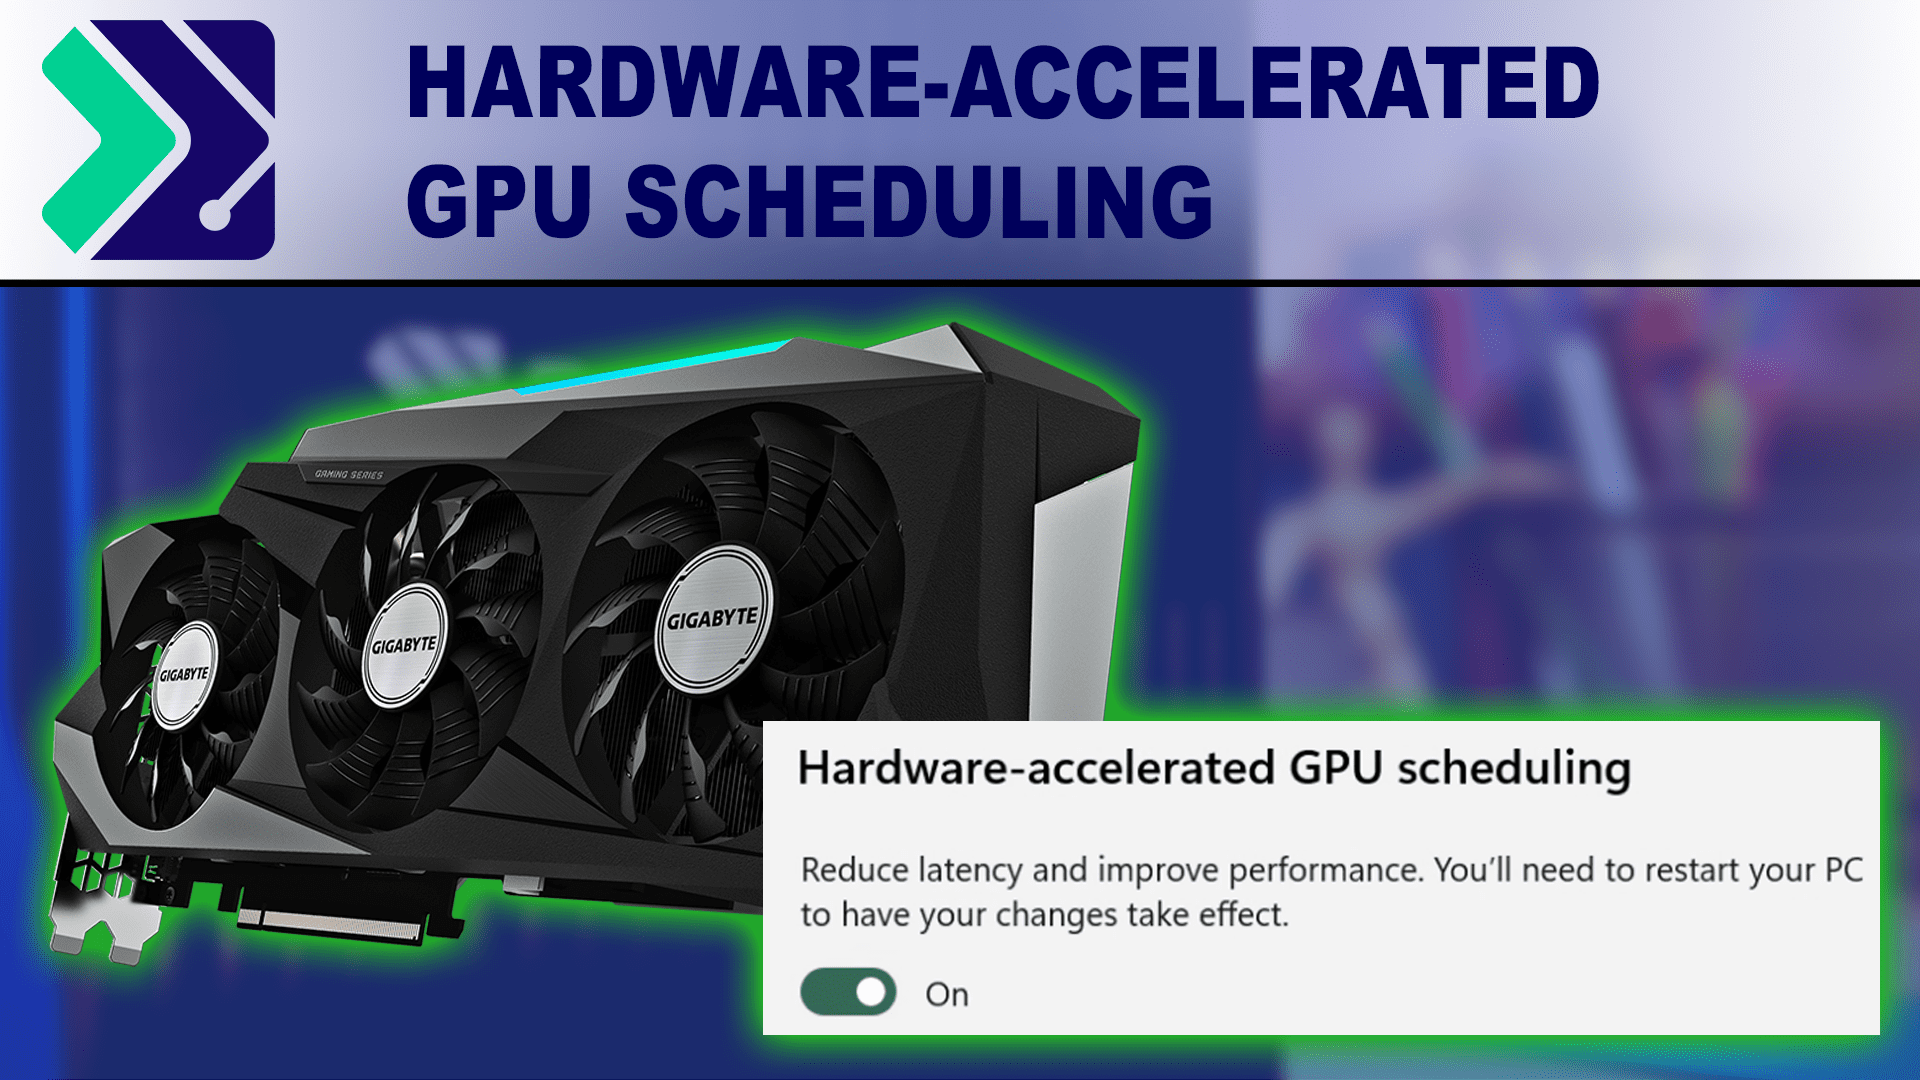 Black Gigabyte GPU on a blue background, overlayed with a box with "Hardware-accelerated GPU scheduling" toggled "On".